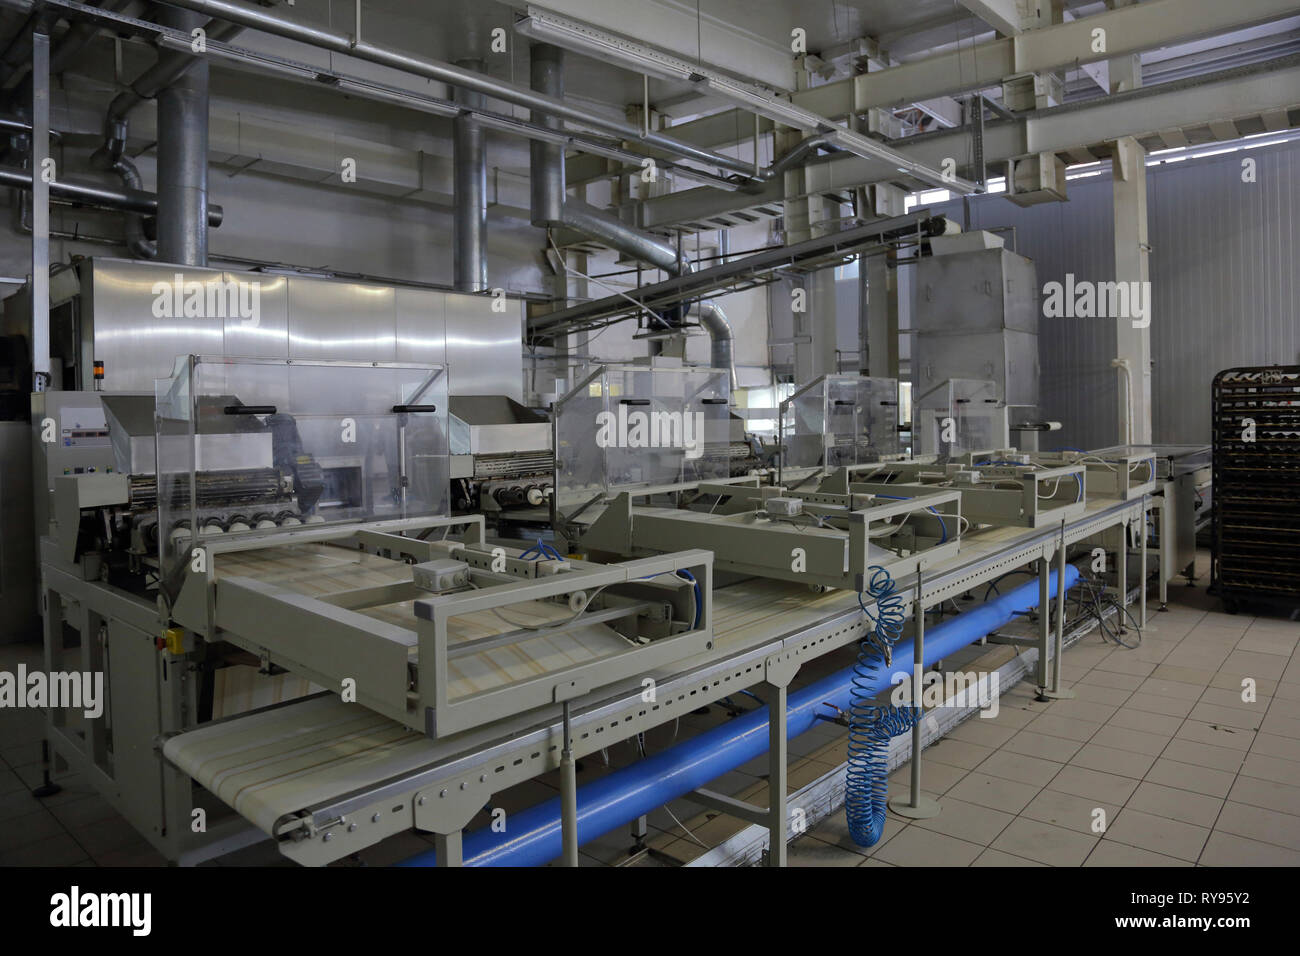 Bread manufacturing equipment in factory Stock Photo